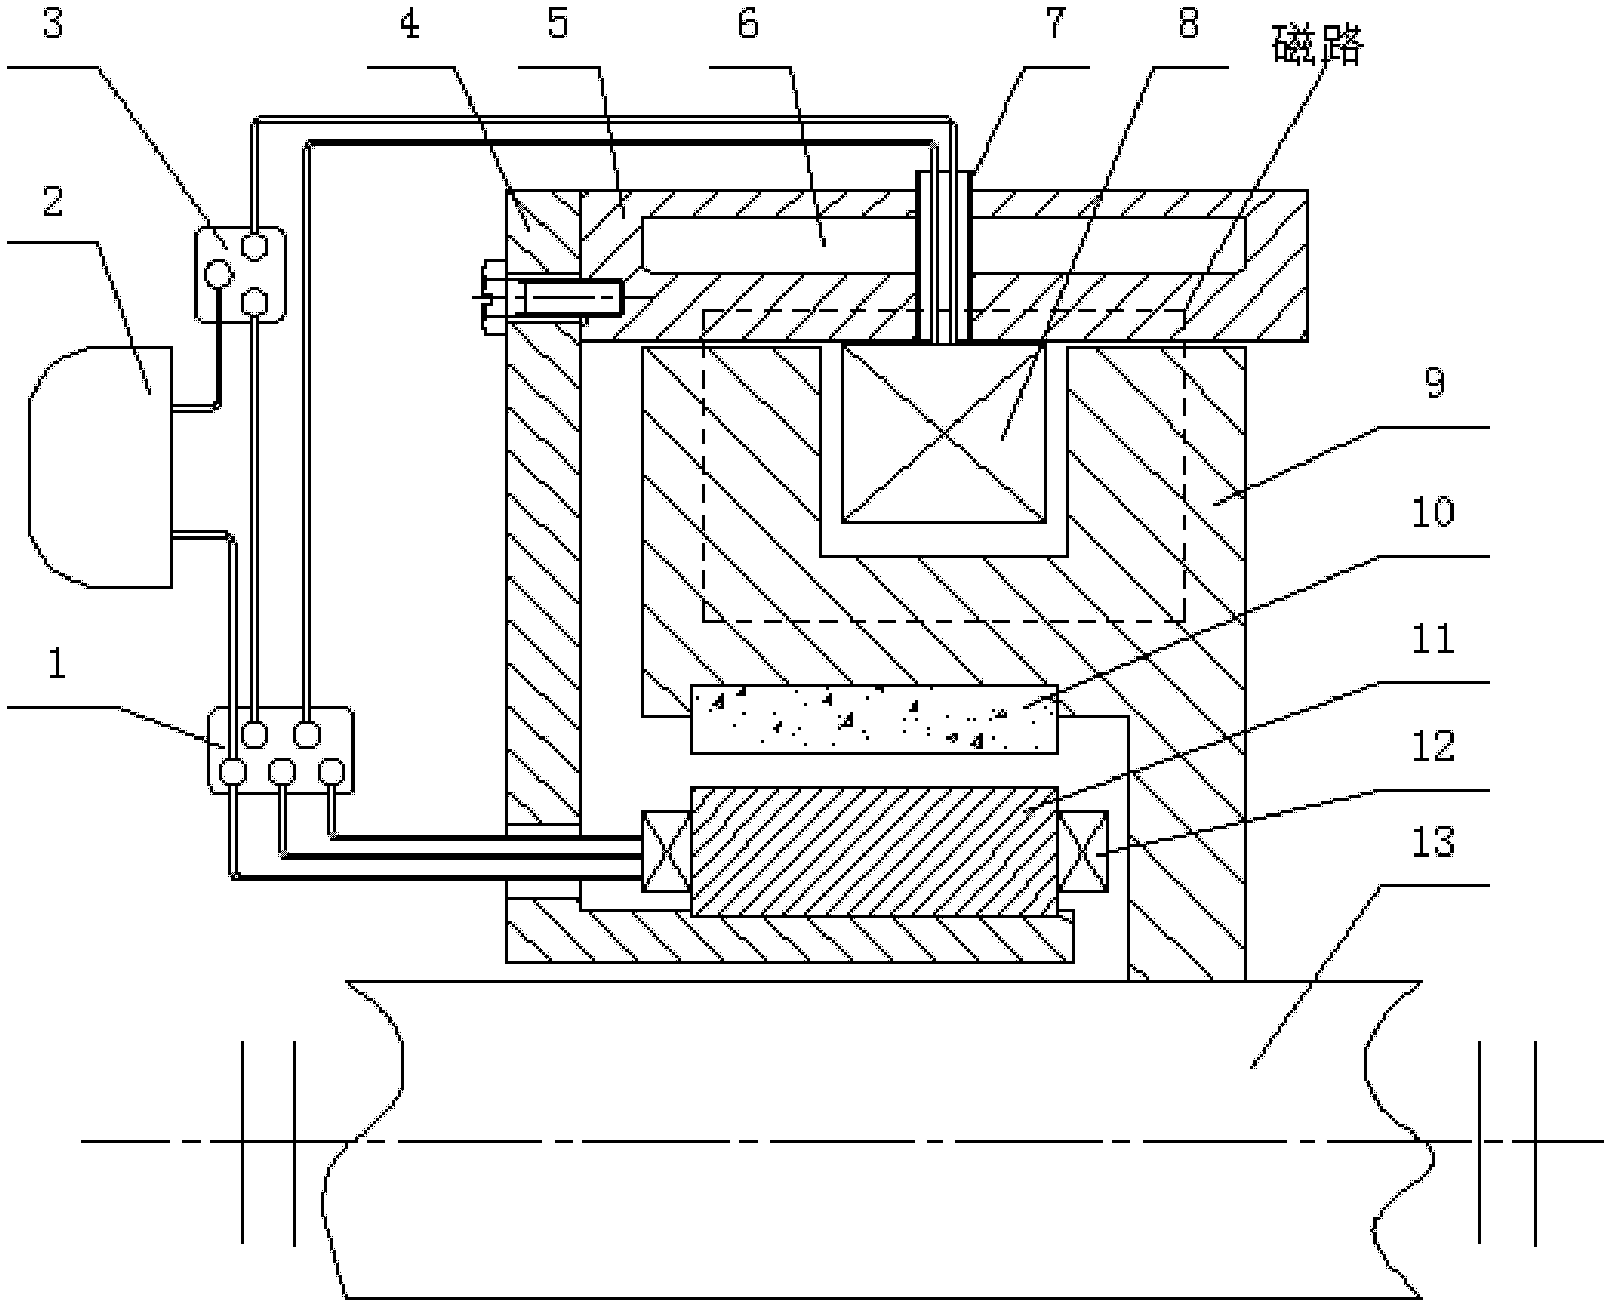 Liquid cooling self-excitation type eddy current retarder with salient pole structure